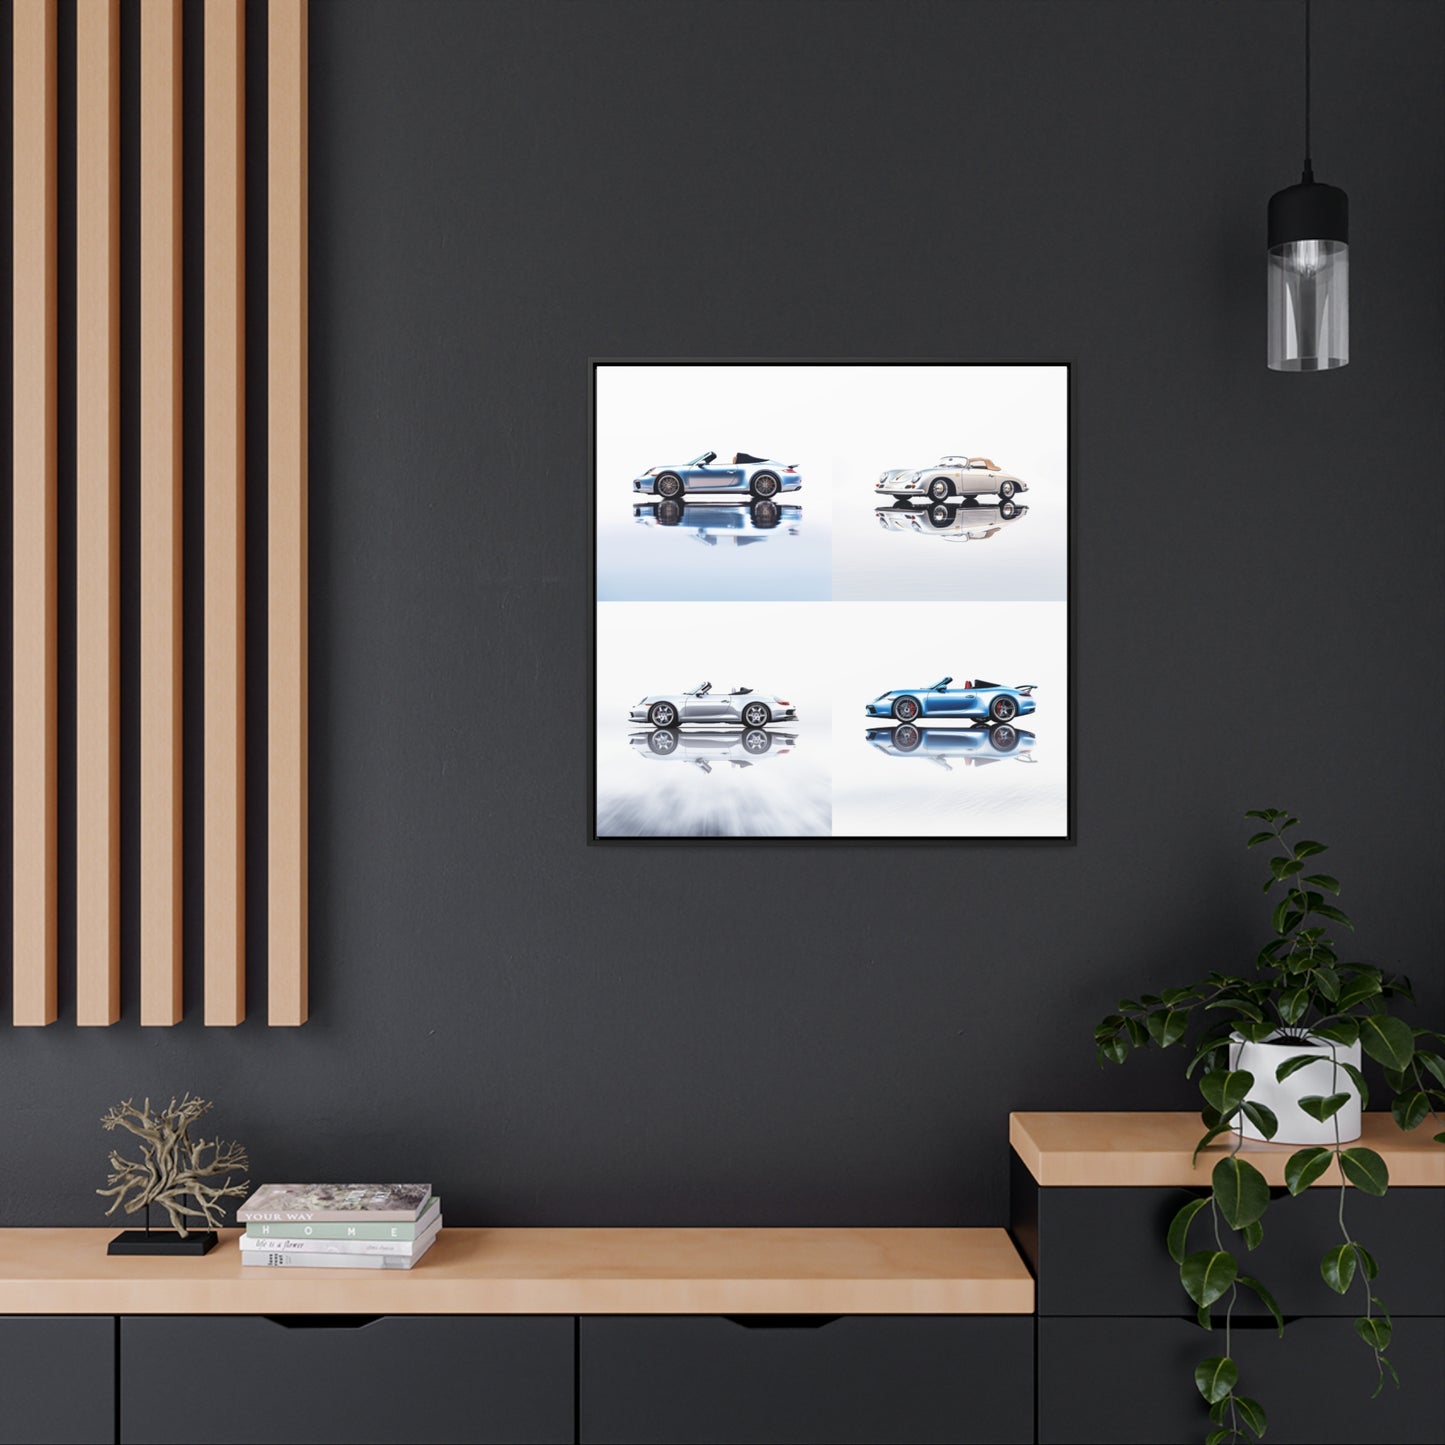 Gallery Canvas Wraps, Square Frame 911 Speedster on water 5